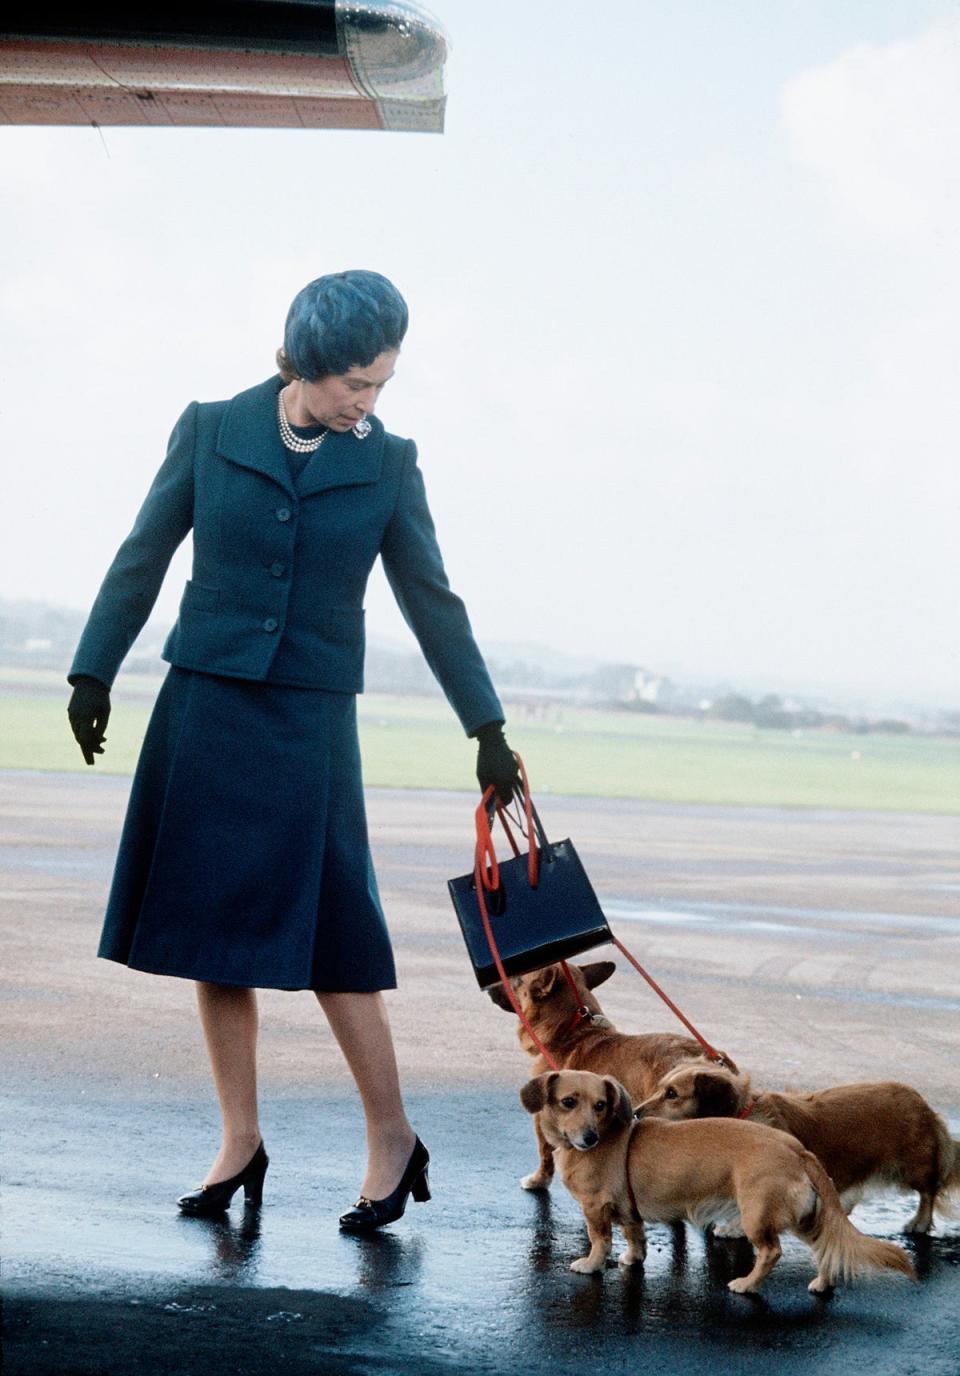 Queen Elizabeth ll arrives at Aberdeen Airport with her corgis to start her holidays in Balmoral, Scotland in 197 (Getty Images)